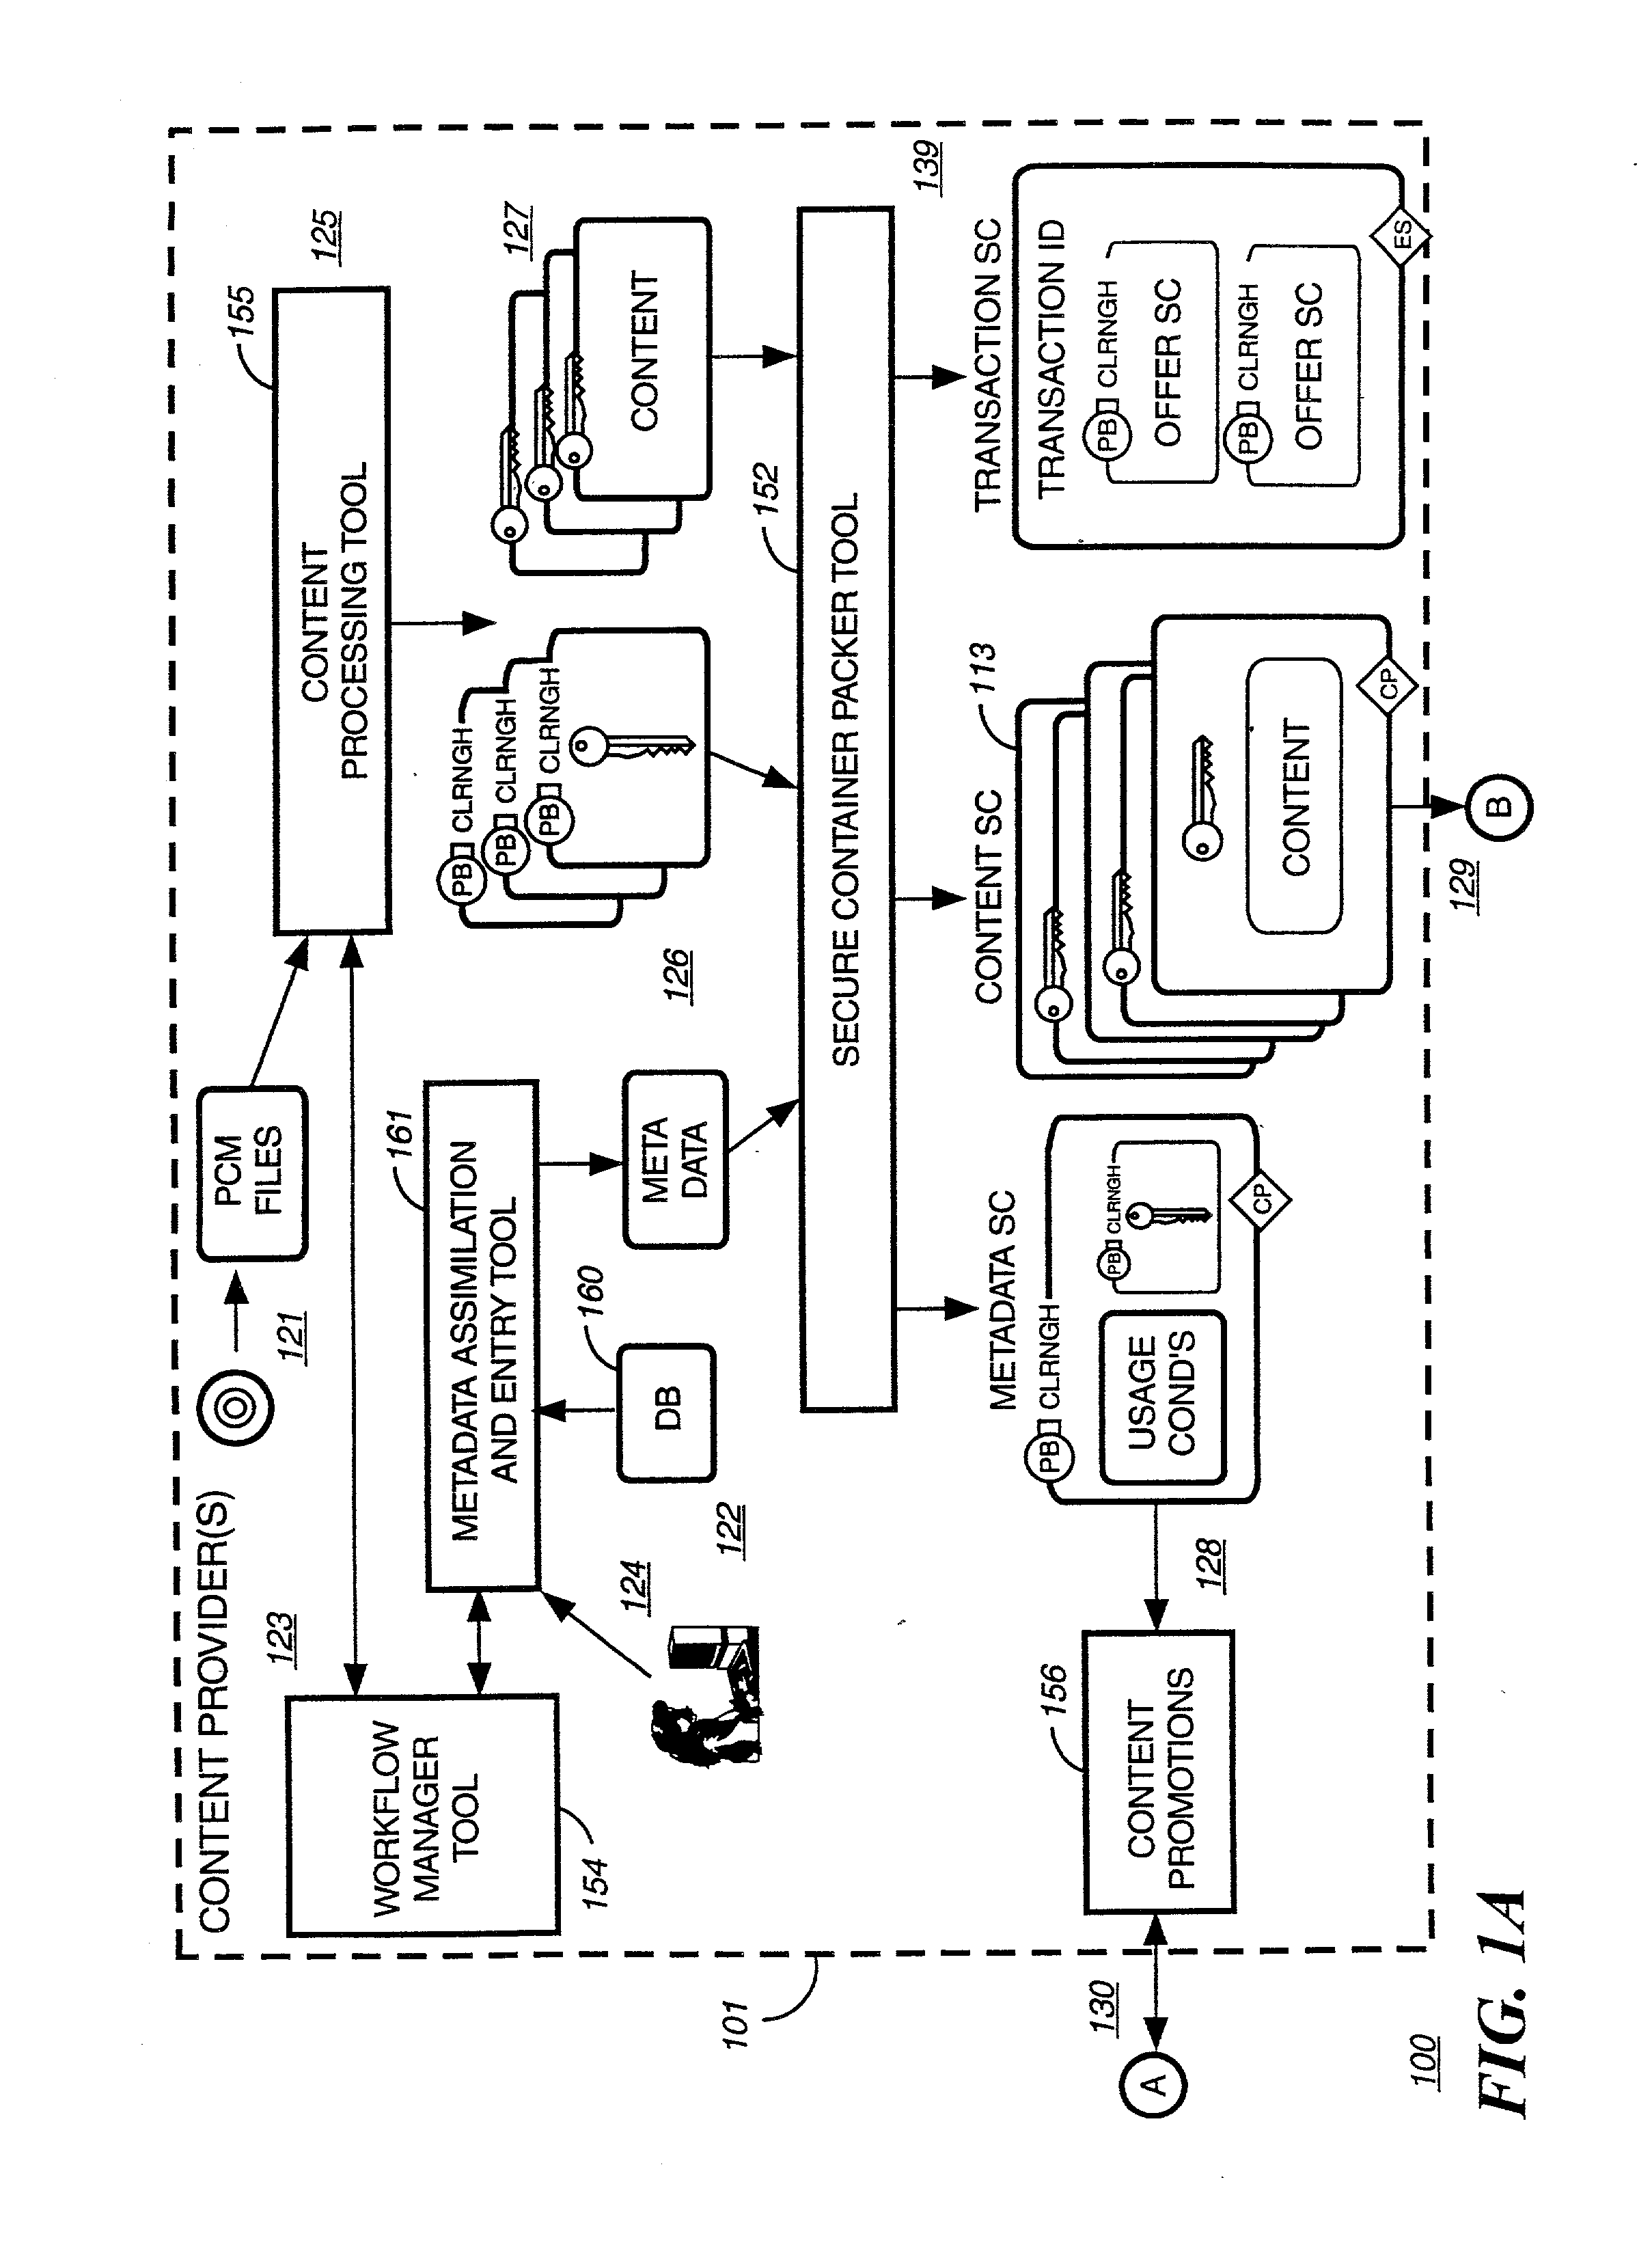 Method and system of preventing unauthorized rerecording of multimedia content